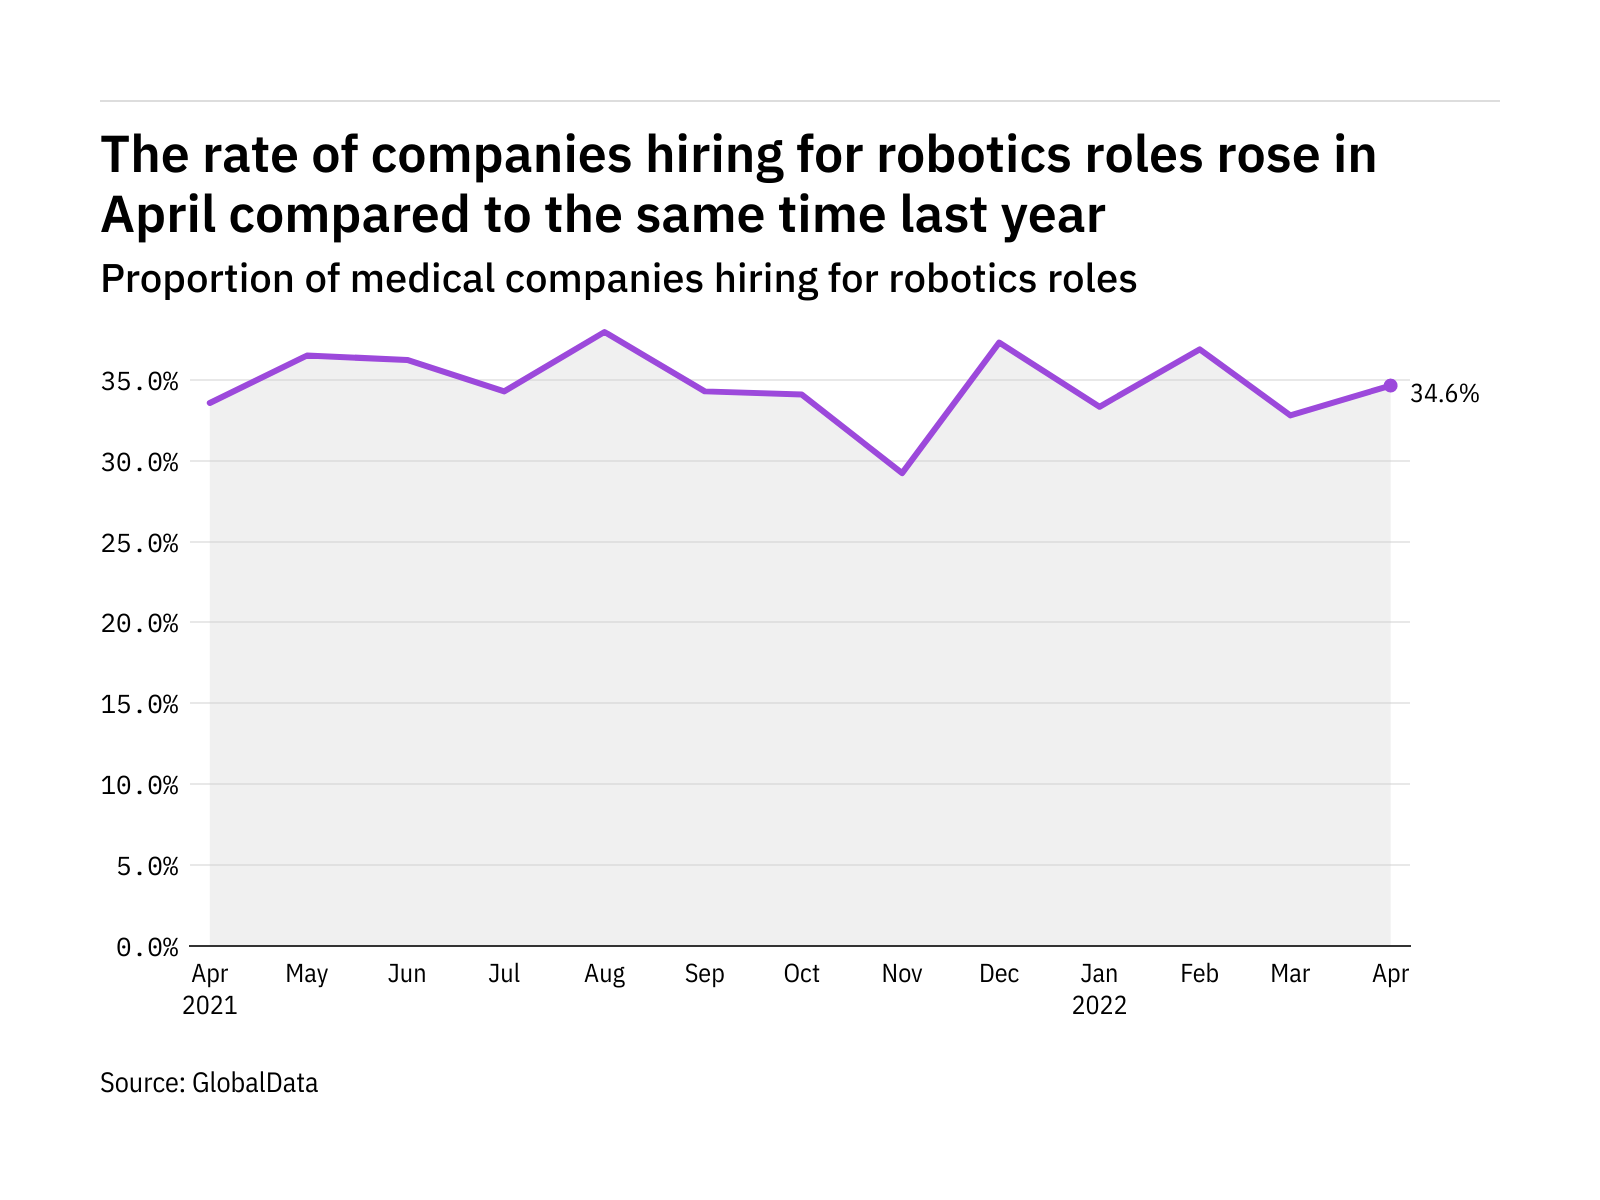 Robotics hiring levels in the medical industry rose in April 2022